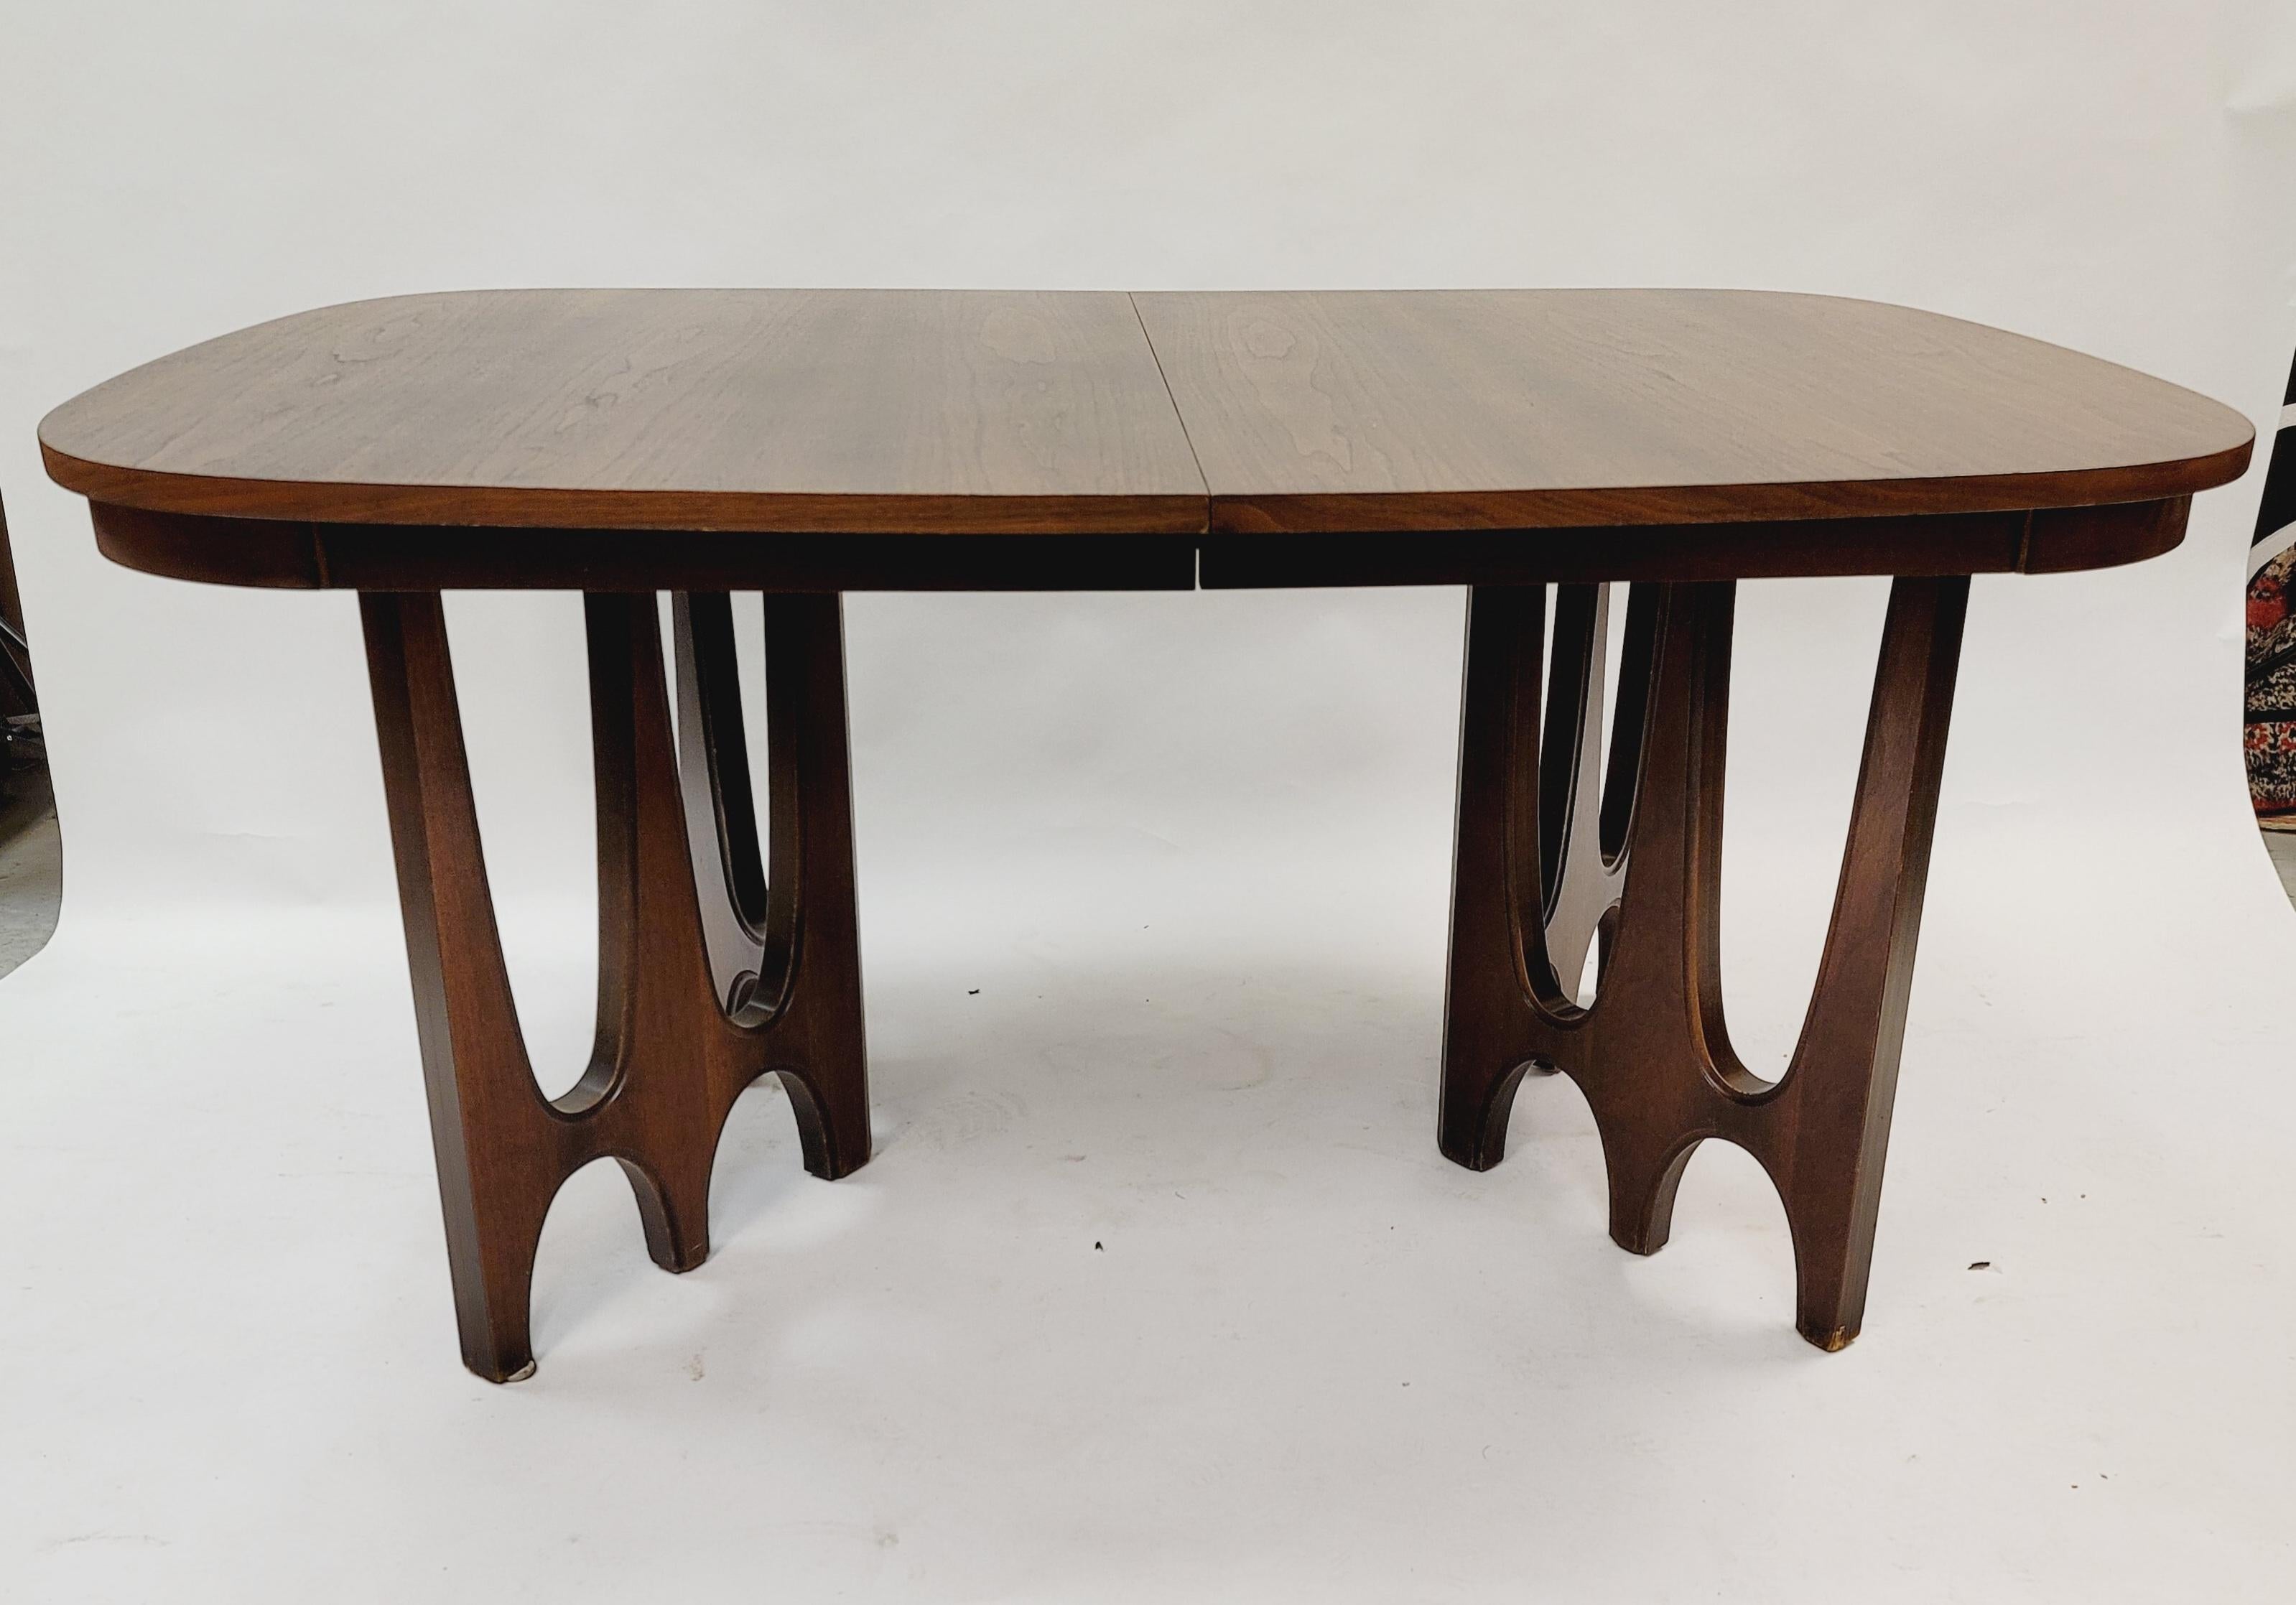 This Broyhill Brasilia dining table is crafted from walnut includes one leaf. The base is the hard-to-find arched base pattern that coordinates so well with the Brasilia chairs.
Dimensions: 43